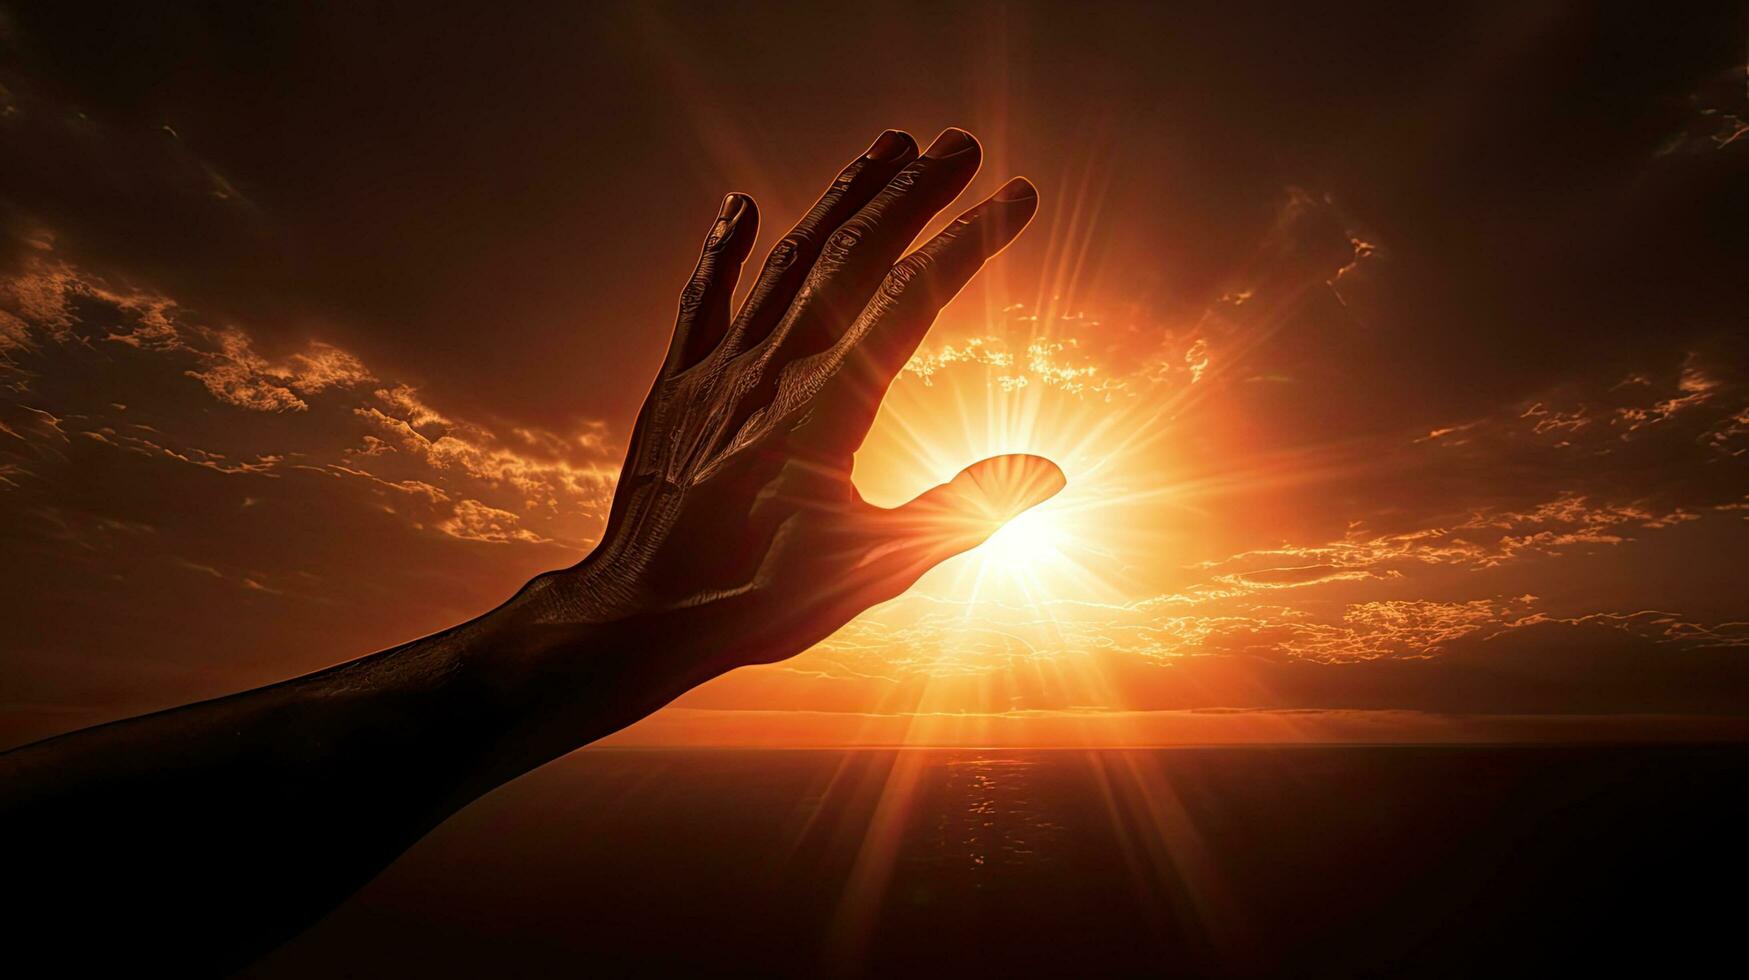 The sun touching the hand photo